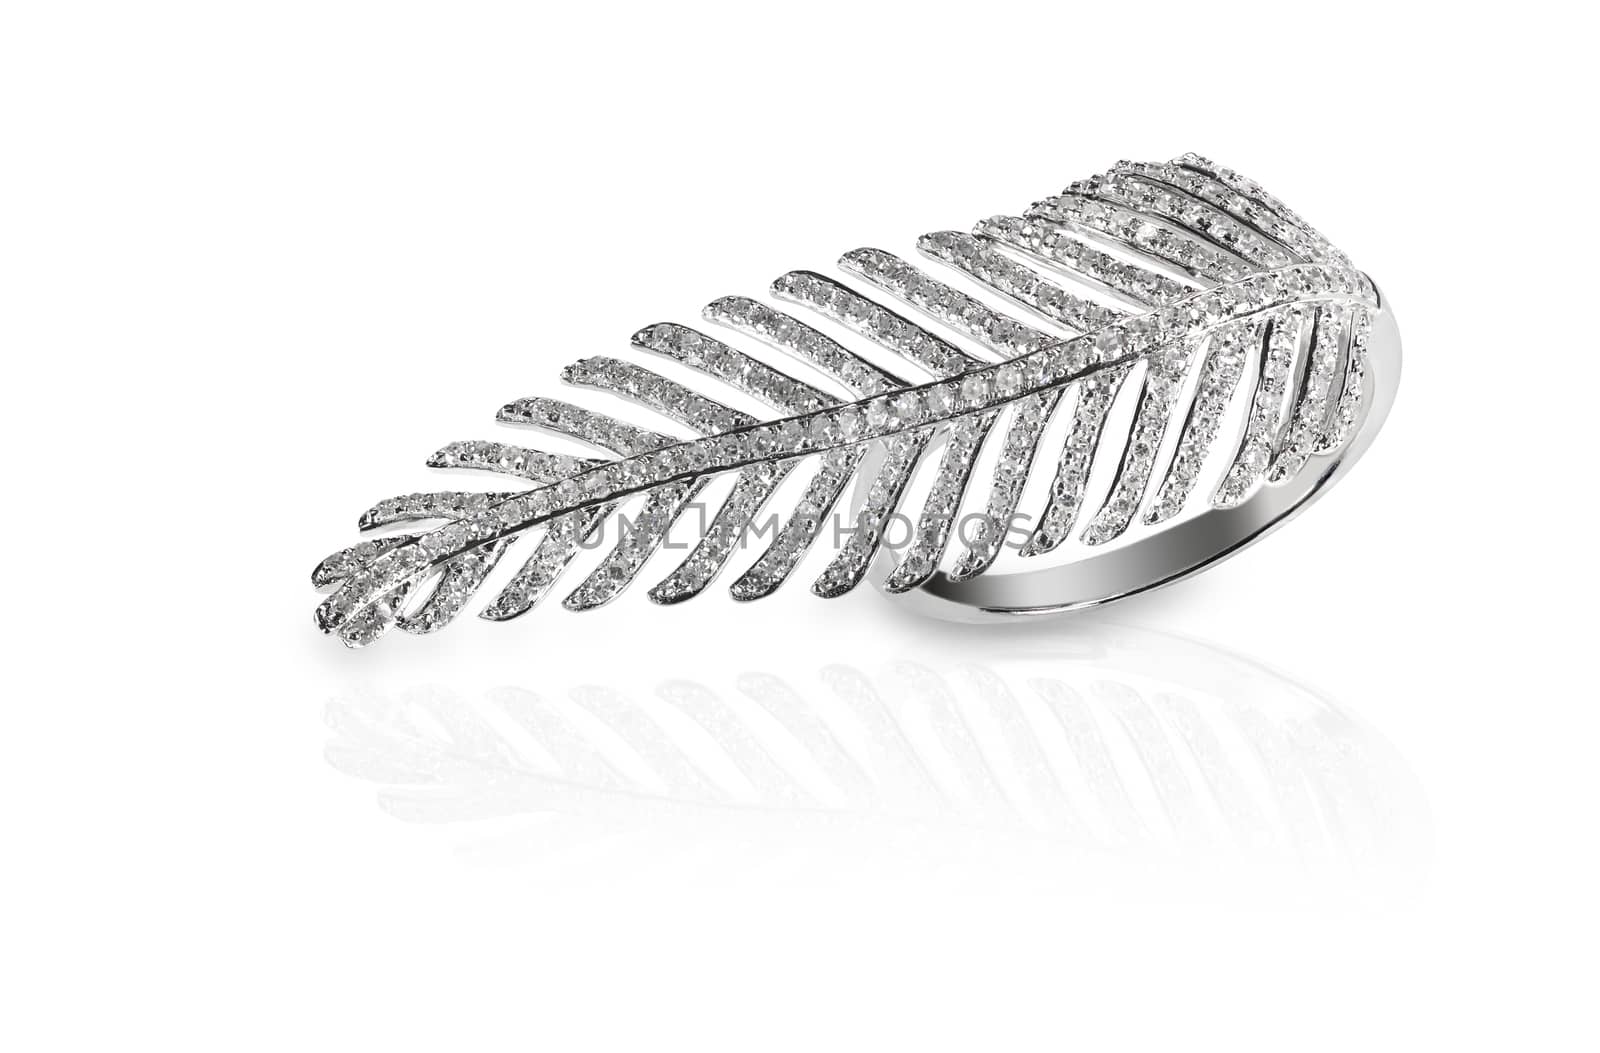 Leaf feather shaped diamond fashion ring by fruitcocktail